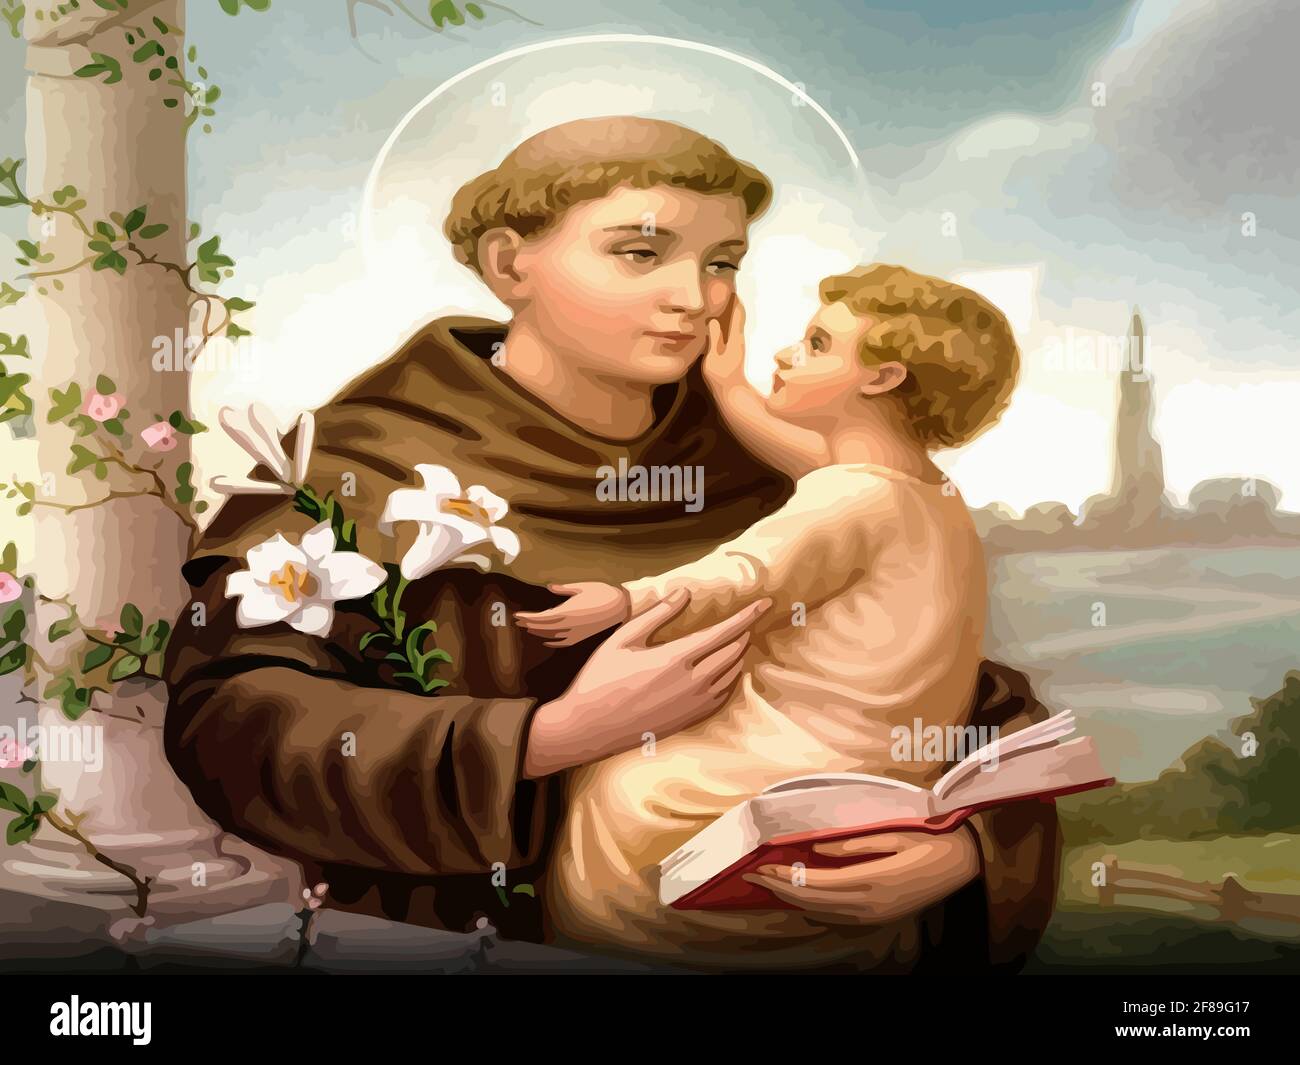 1048 St Anthony Statue Images Stock Photos  Vectors  Shutterstock